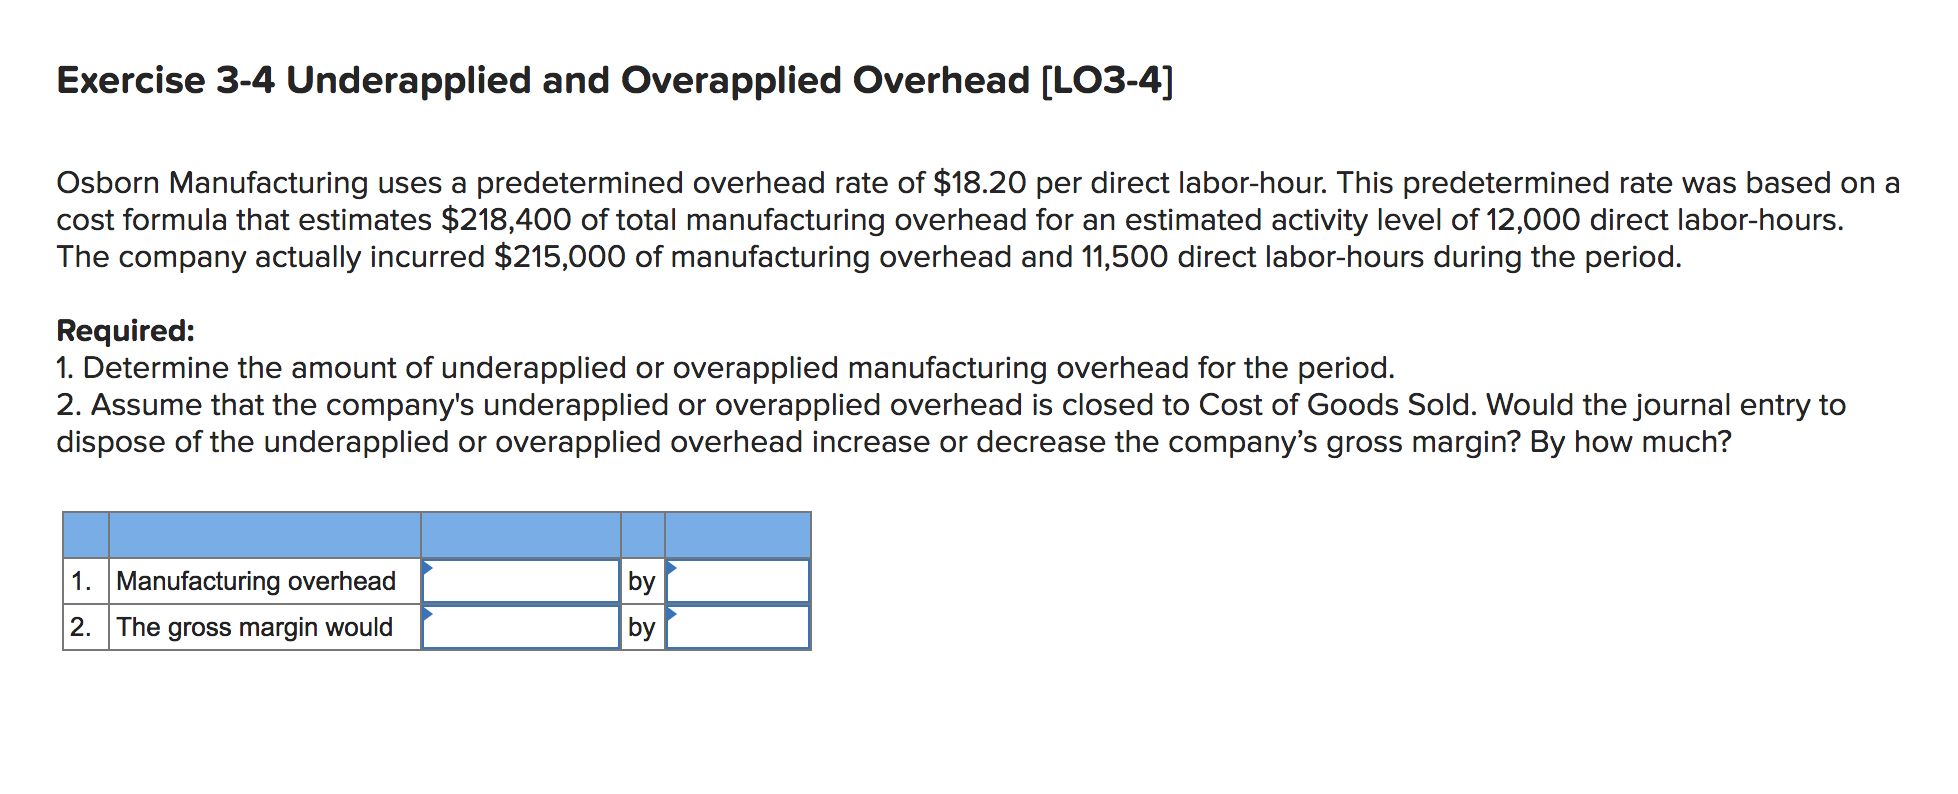 Exercise 3-4 Underapplied and Overapplied Overhead [LO3-4]
Osborn Manufacturing uses a predetermined overhead rate of $18.20 per direct labor-hour. This predetermined rate was based on a
cost formula that estimates $218,400 of total manufacturing overhead for an estimated activity level of 12,000 direct labor-hours.
The company actually incurred $215,000 of manufacturing overhead and 11,500 direct labor-hours during the period.
Required:
1. Determine the amount of underapplied or overapplied manufacturing overhead for the period.
2. Assume that the company's underapplied or overapplied overhead is closed to Cost of Goods Sold. Would the journal entry to
dispose of the underapplied or overapplied overhead increase or decrease the company's gross margin? By how much?
by
by
1. Manufacturing overhead
2. The gross margin would
